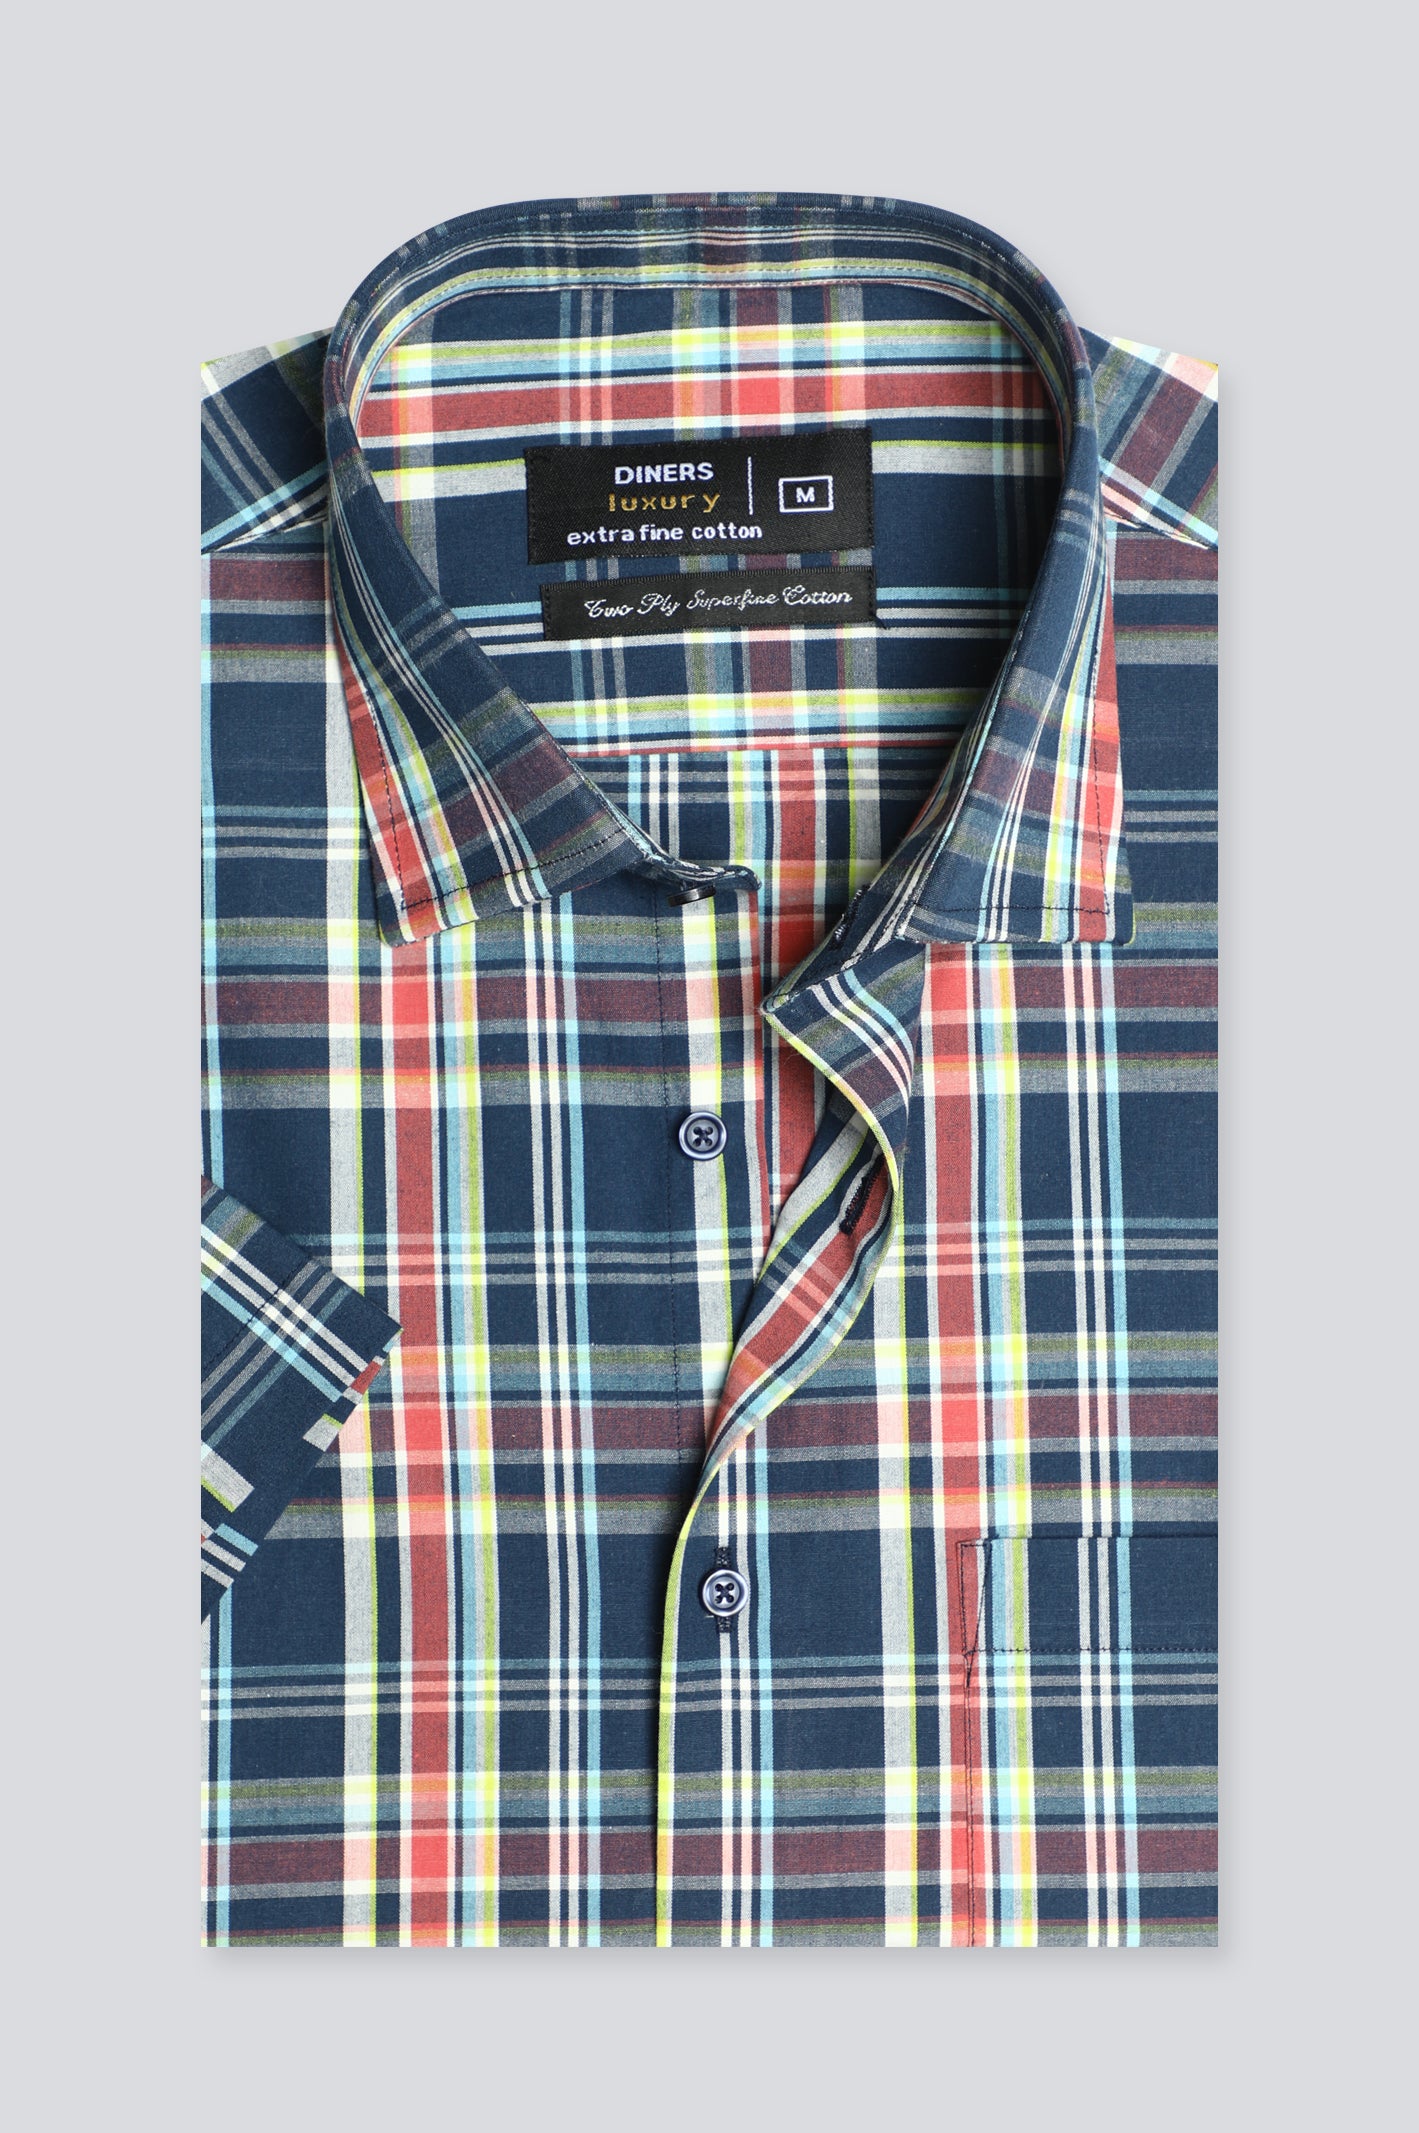 Glen Plaid Check Formal Shirt (Half Sleeve) From Diners